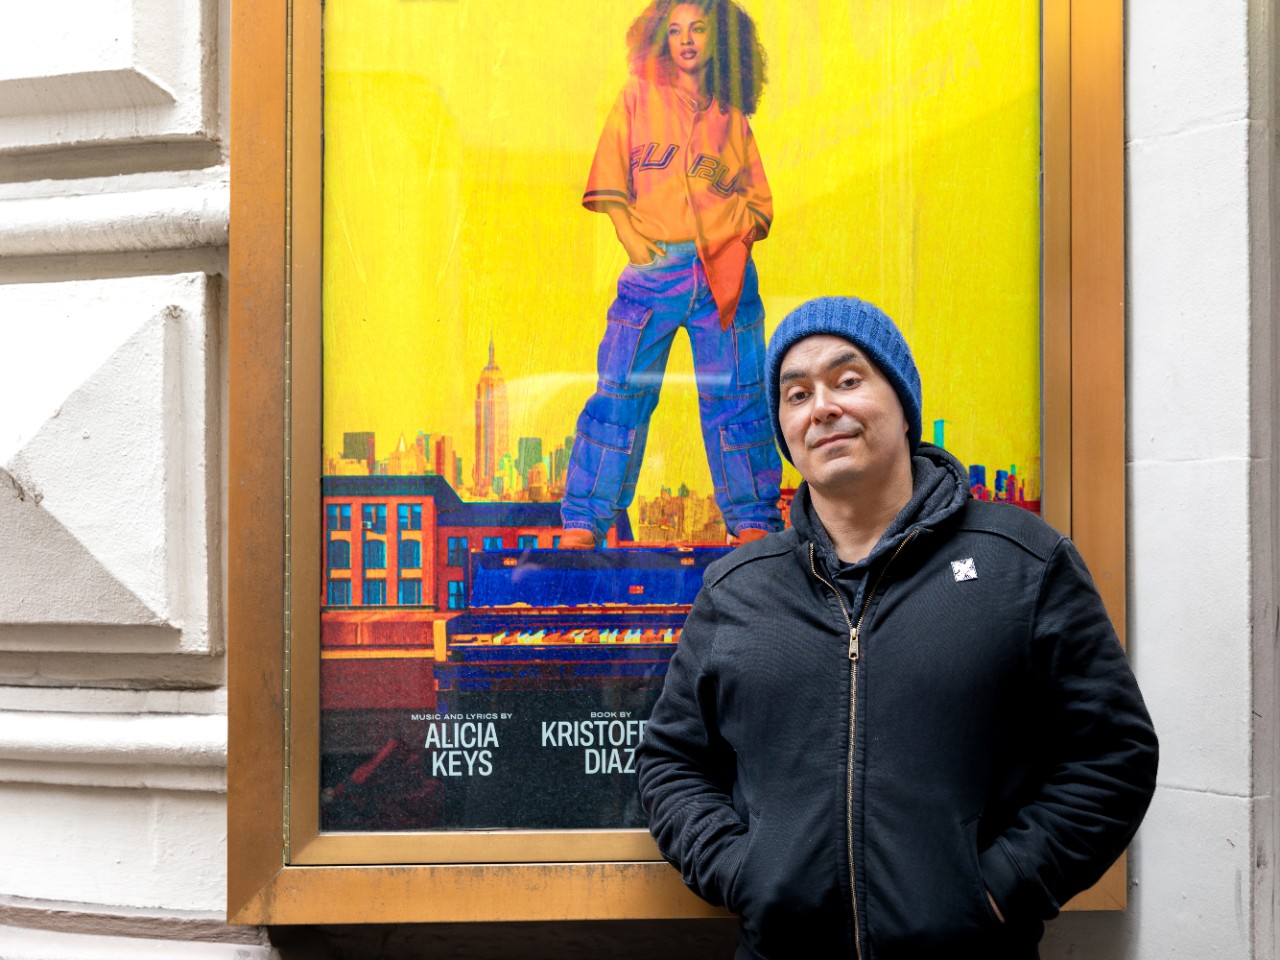 Playwright and NYU associate arts professor Kristoffer Diaz stands in front of a poster for the new musical “Hell’s Kitchen.”